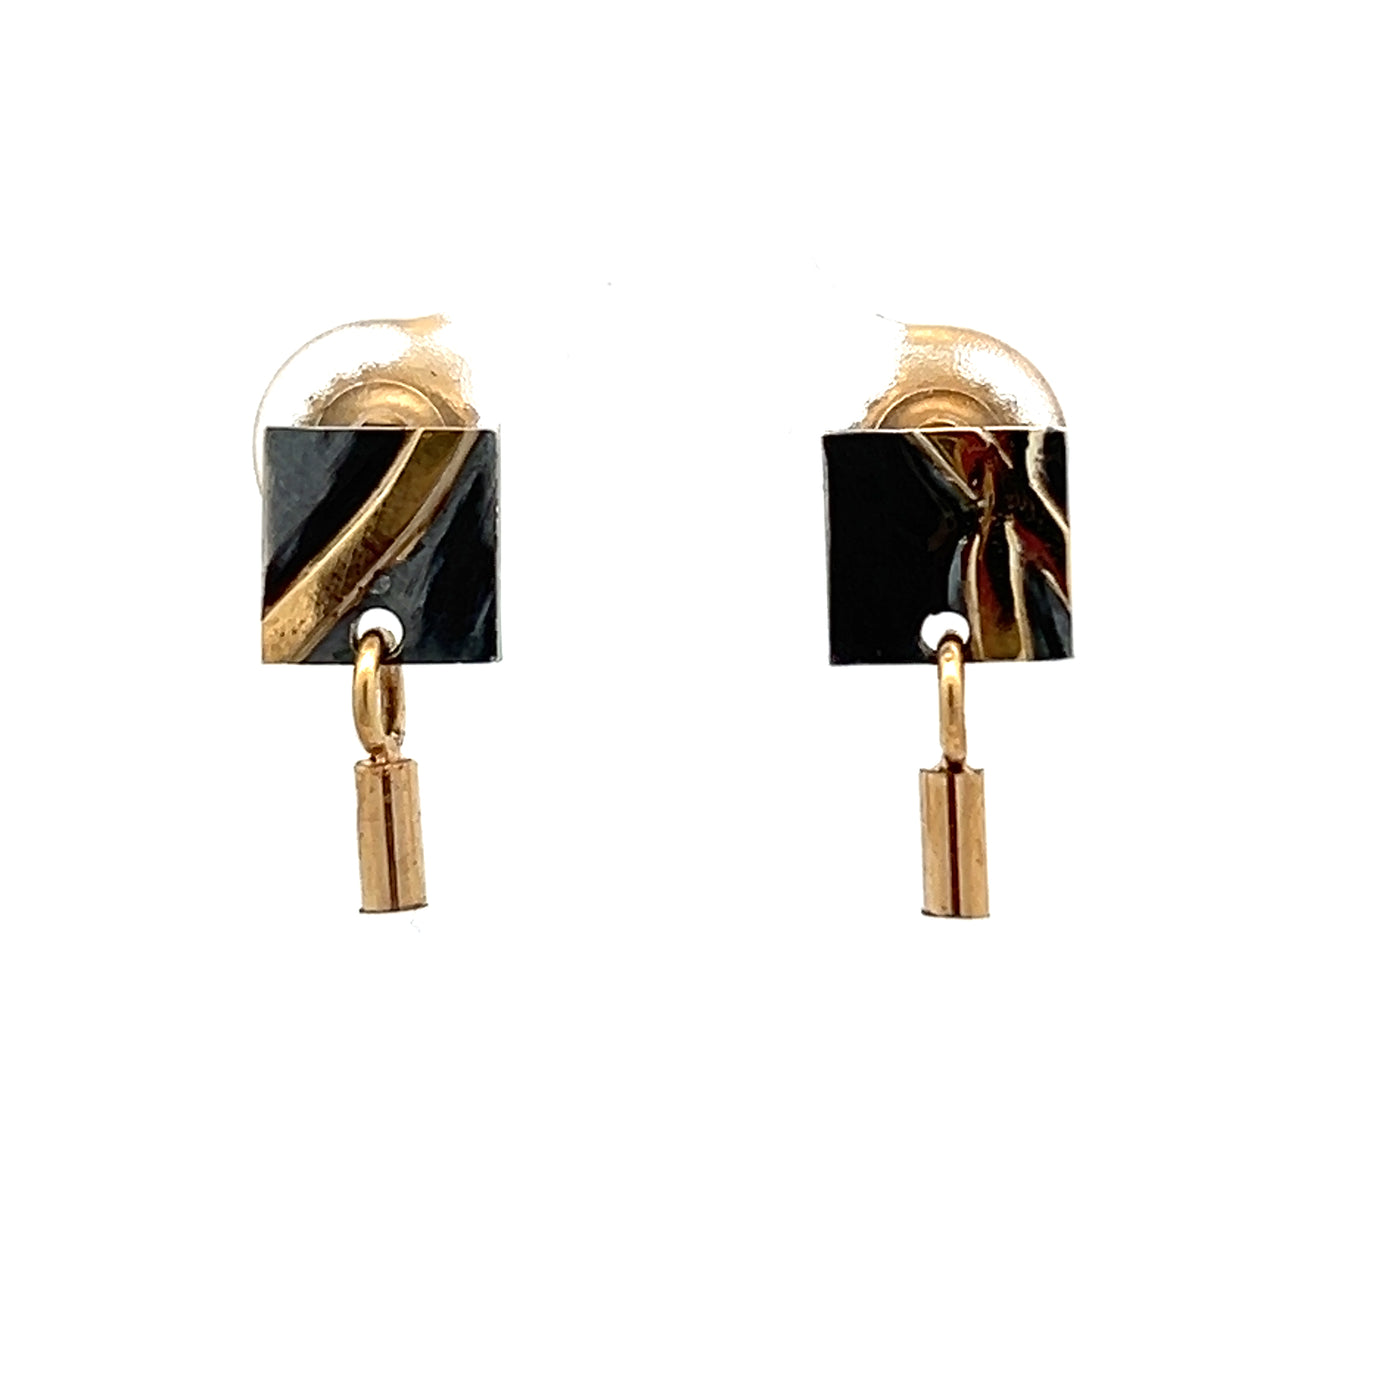 Oxidized Sterling Silver and 18k Yellow Gold Pathways Earrings by Paul Richter